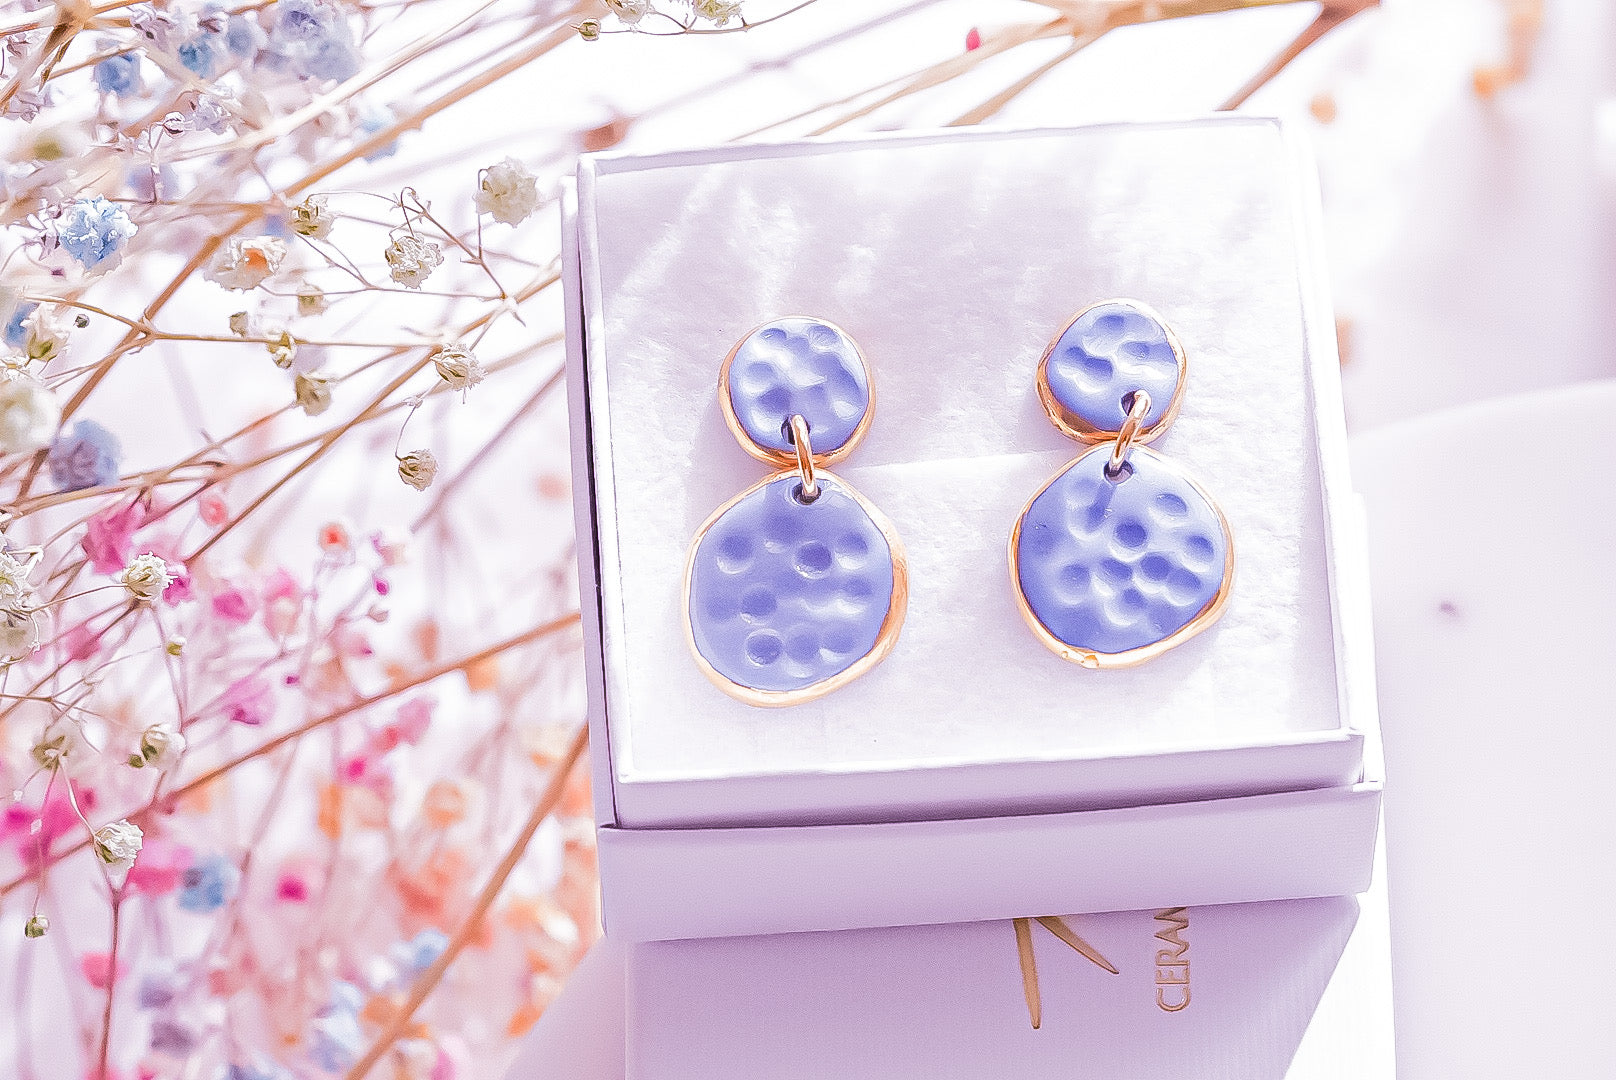 Earrings in Soft Blue with Golden rim